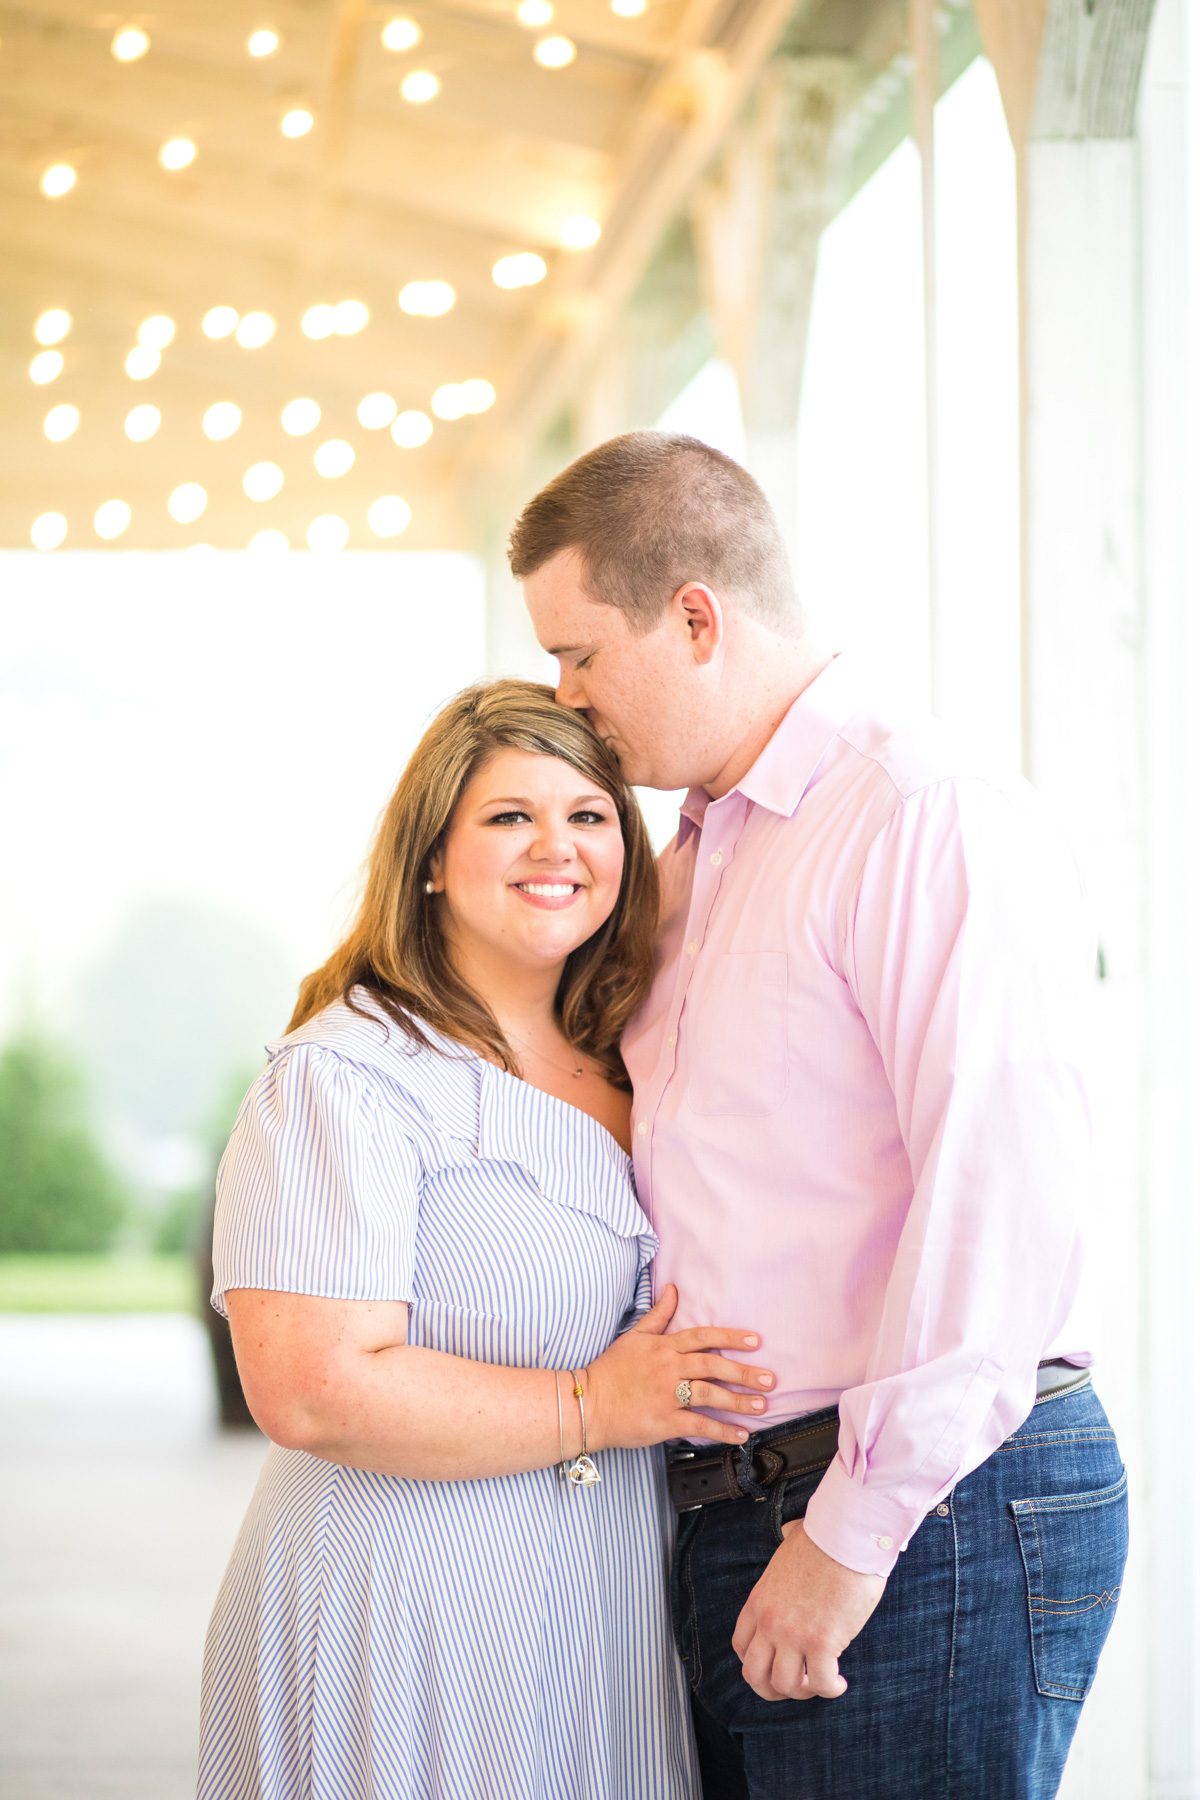 Rainy day engagement session at white dove barn in beechgrove tn